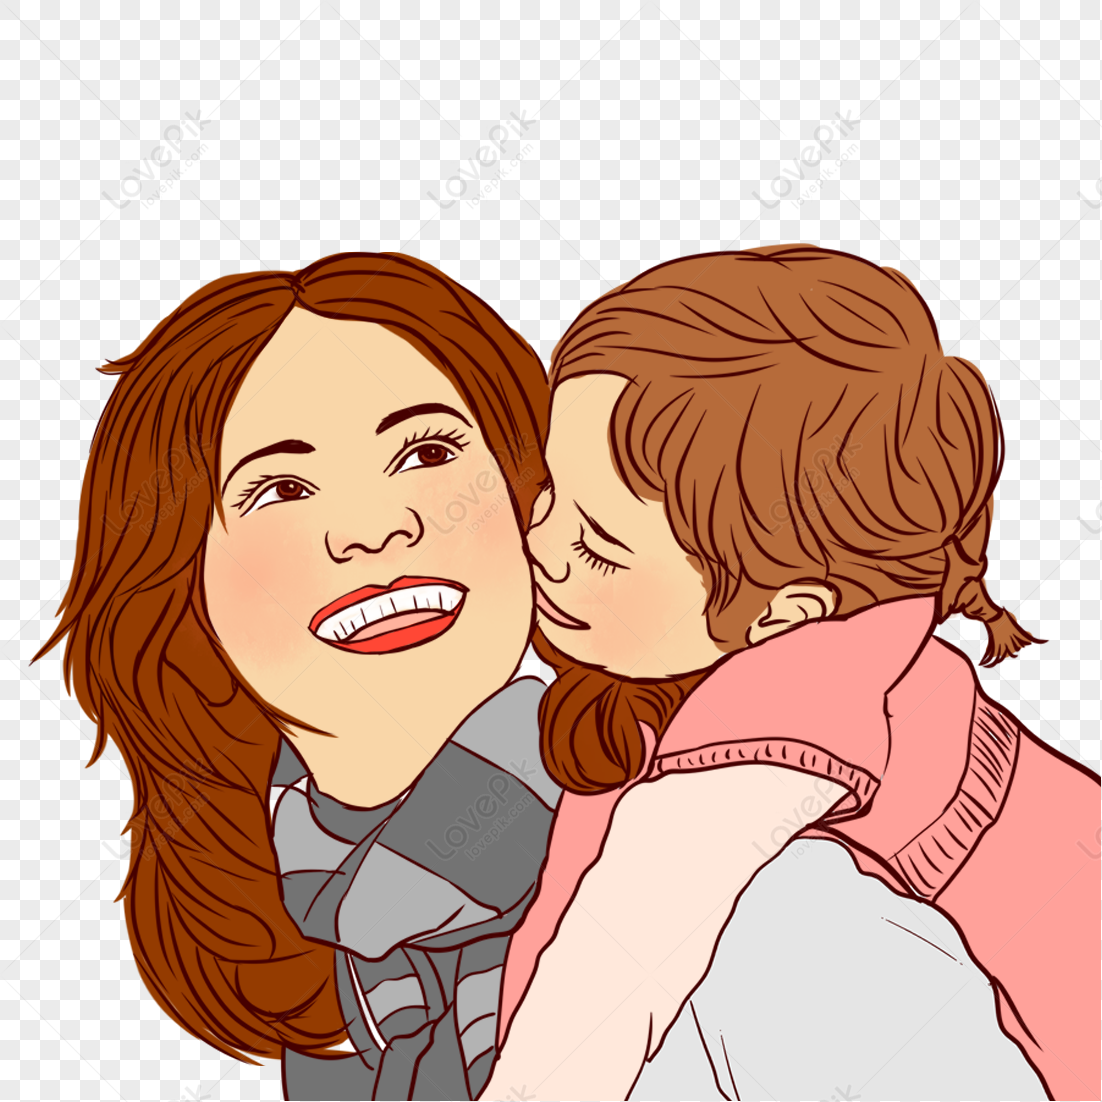 Premium Photo | A drawing of a mother and daughter hugging and the words 